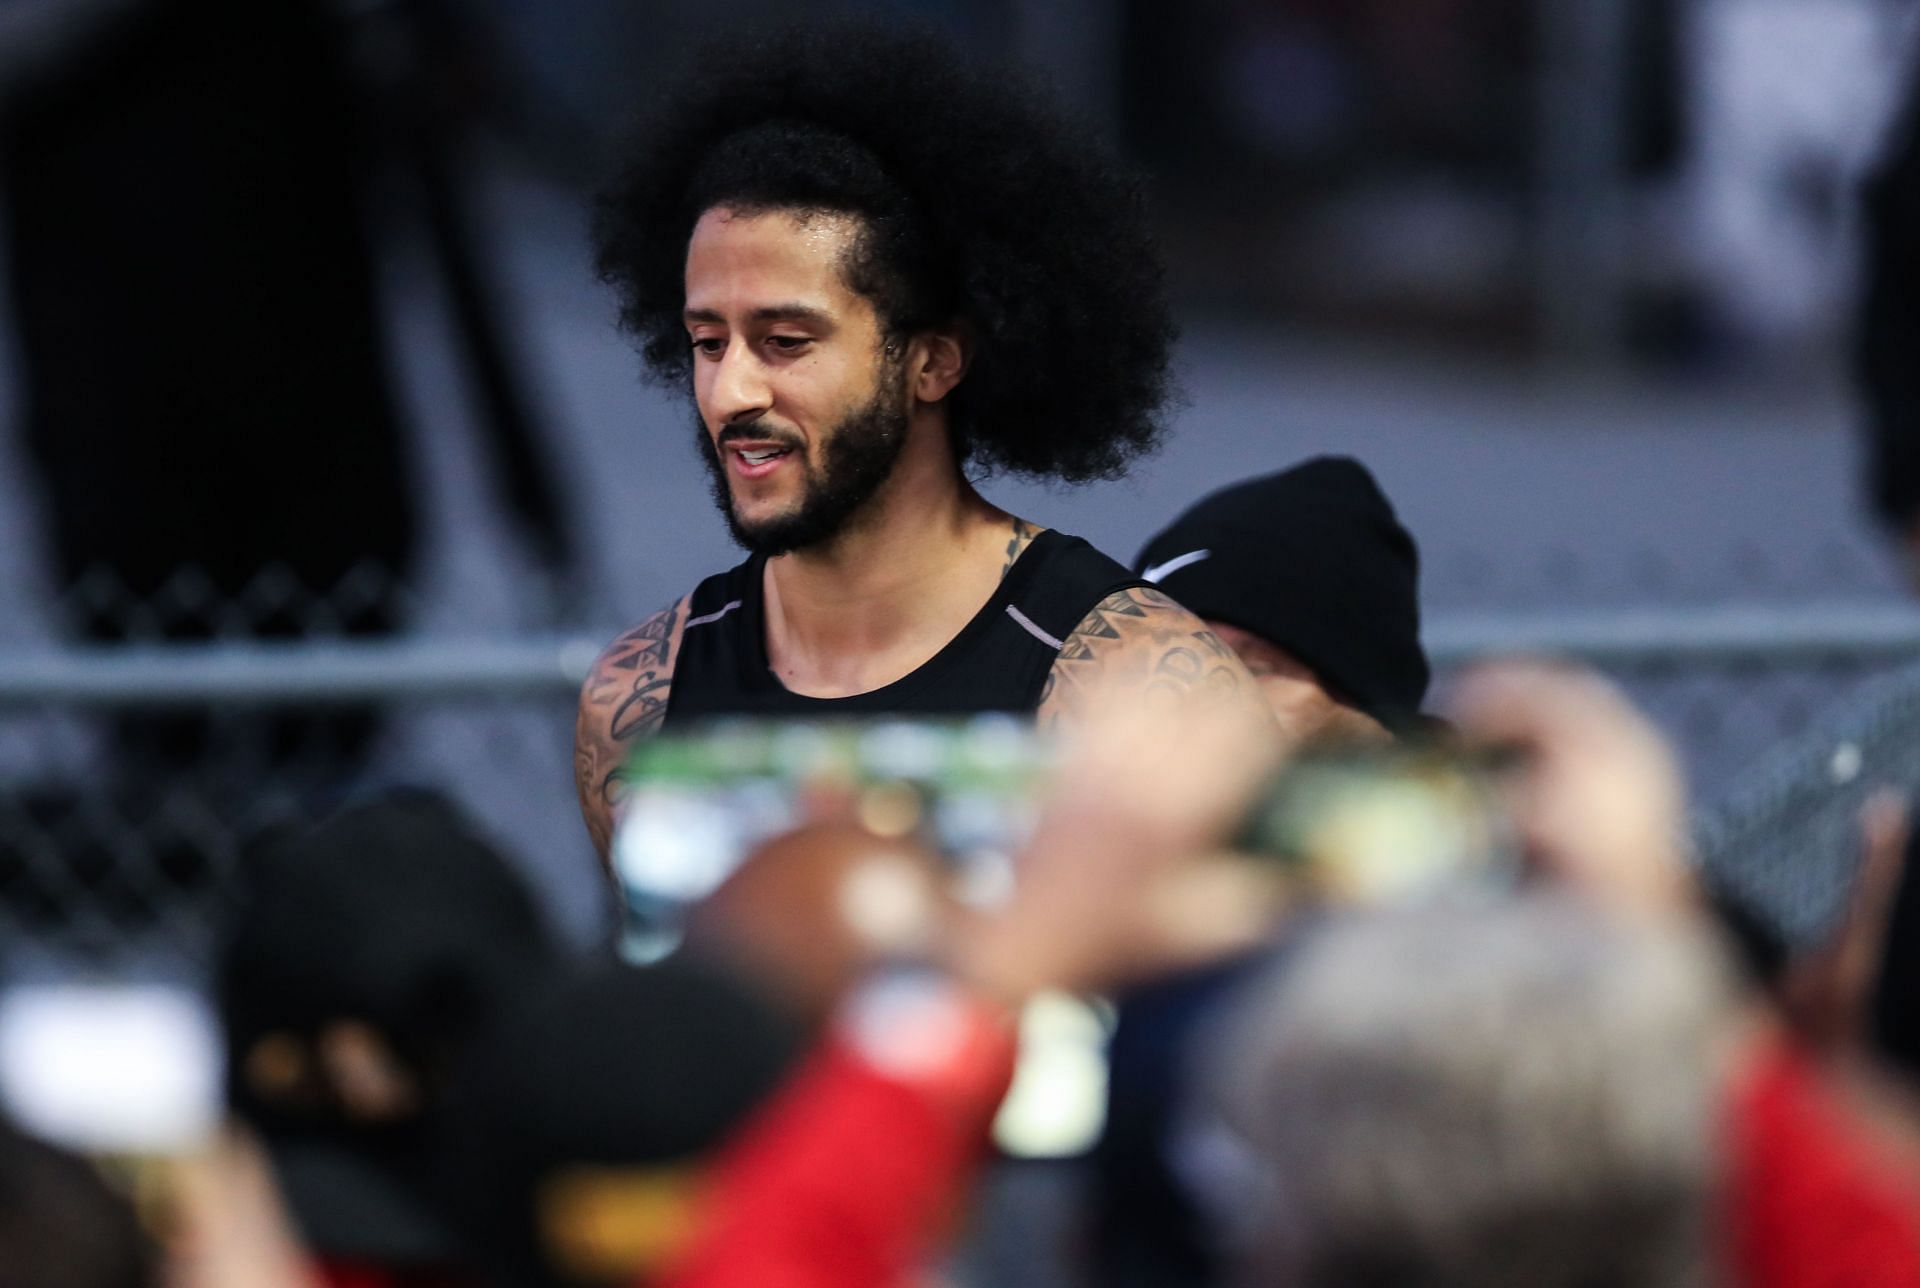 Colin Kaepernick was heavily criticized by an NFL analyst